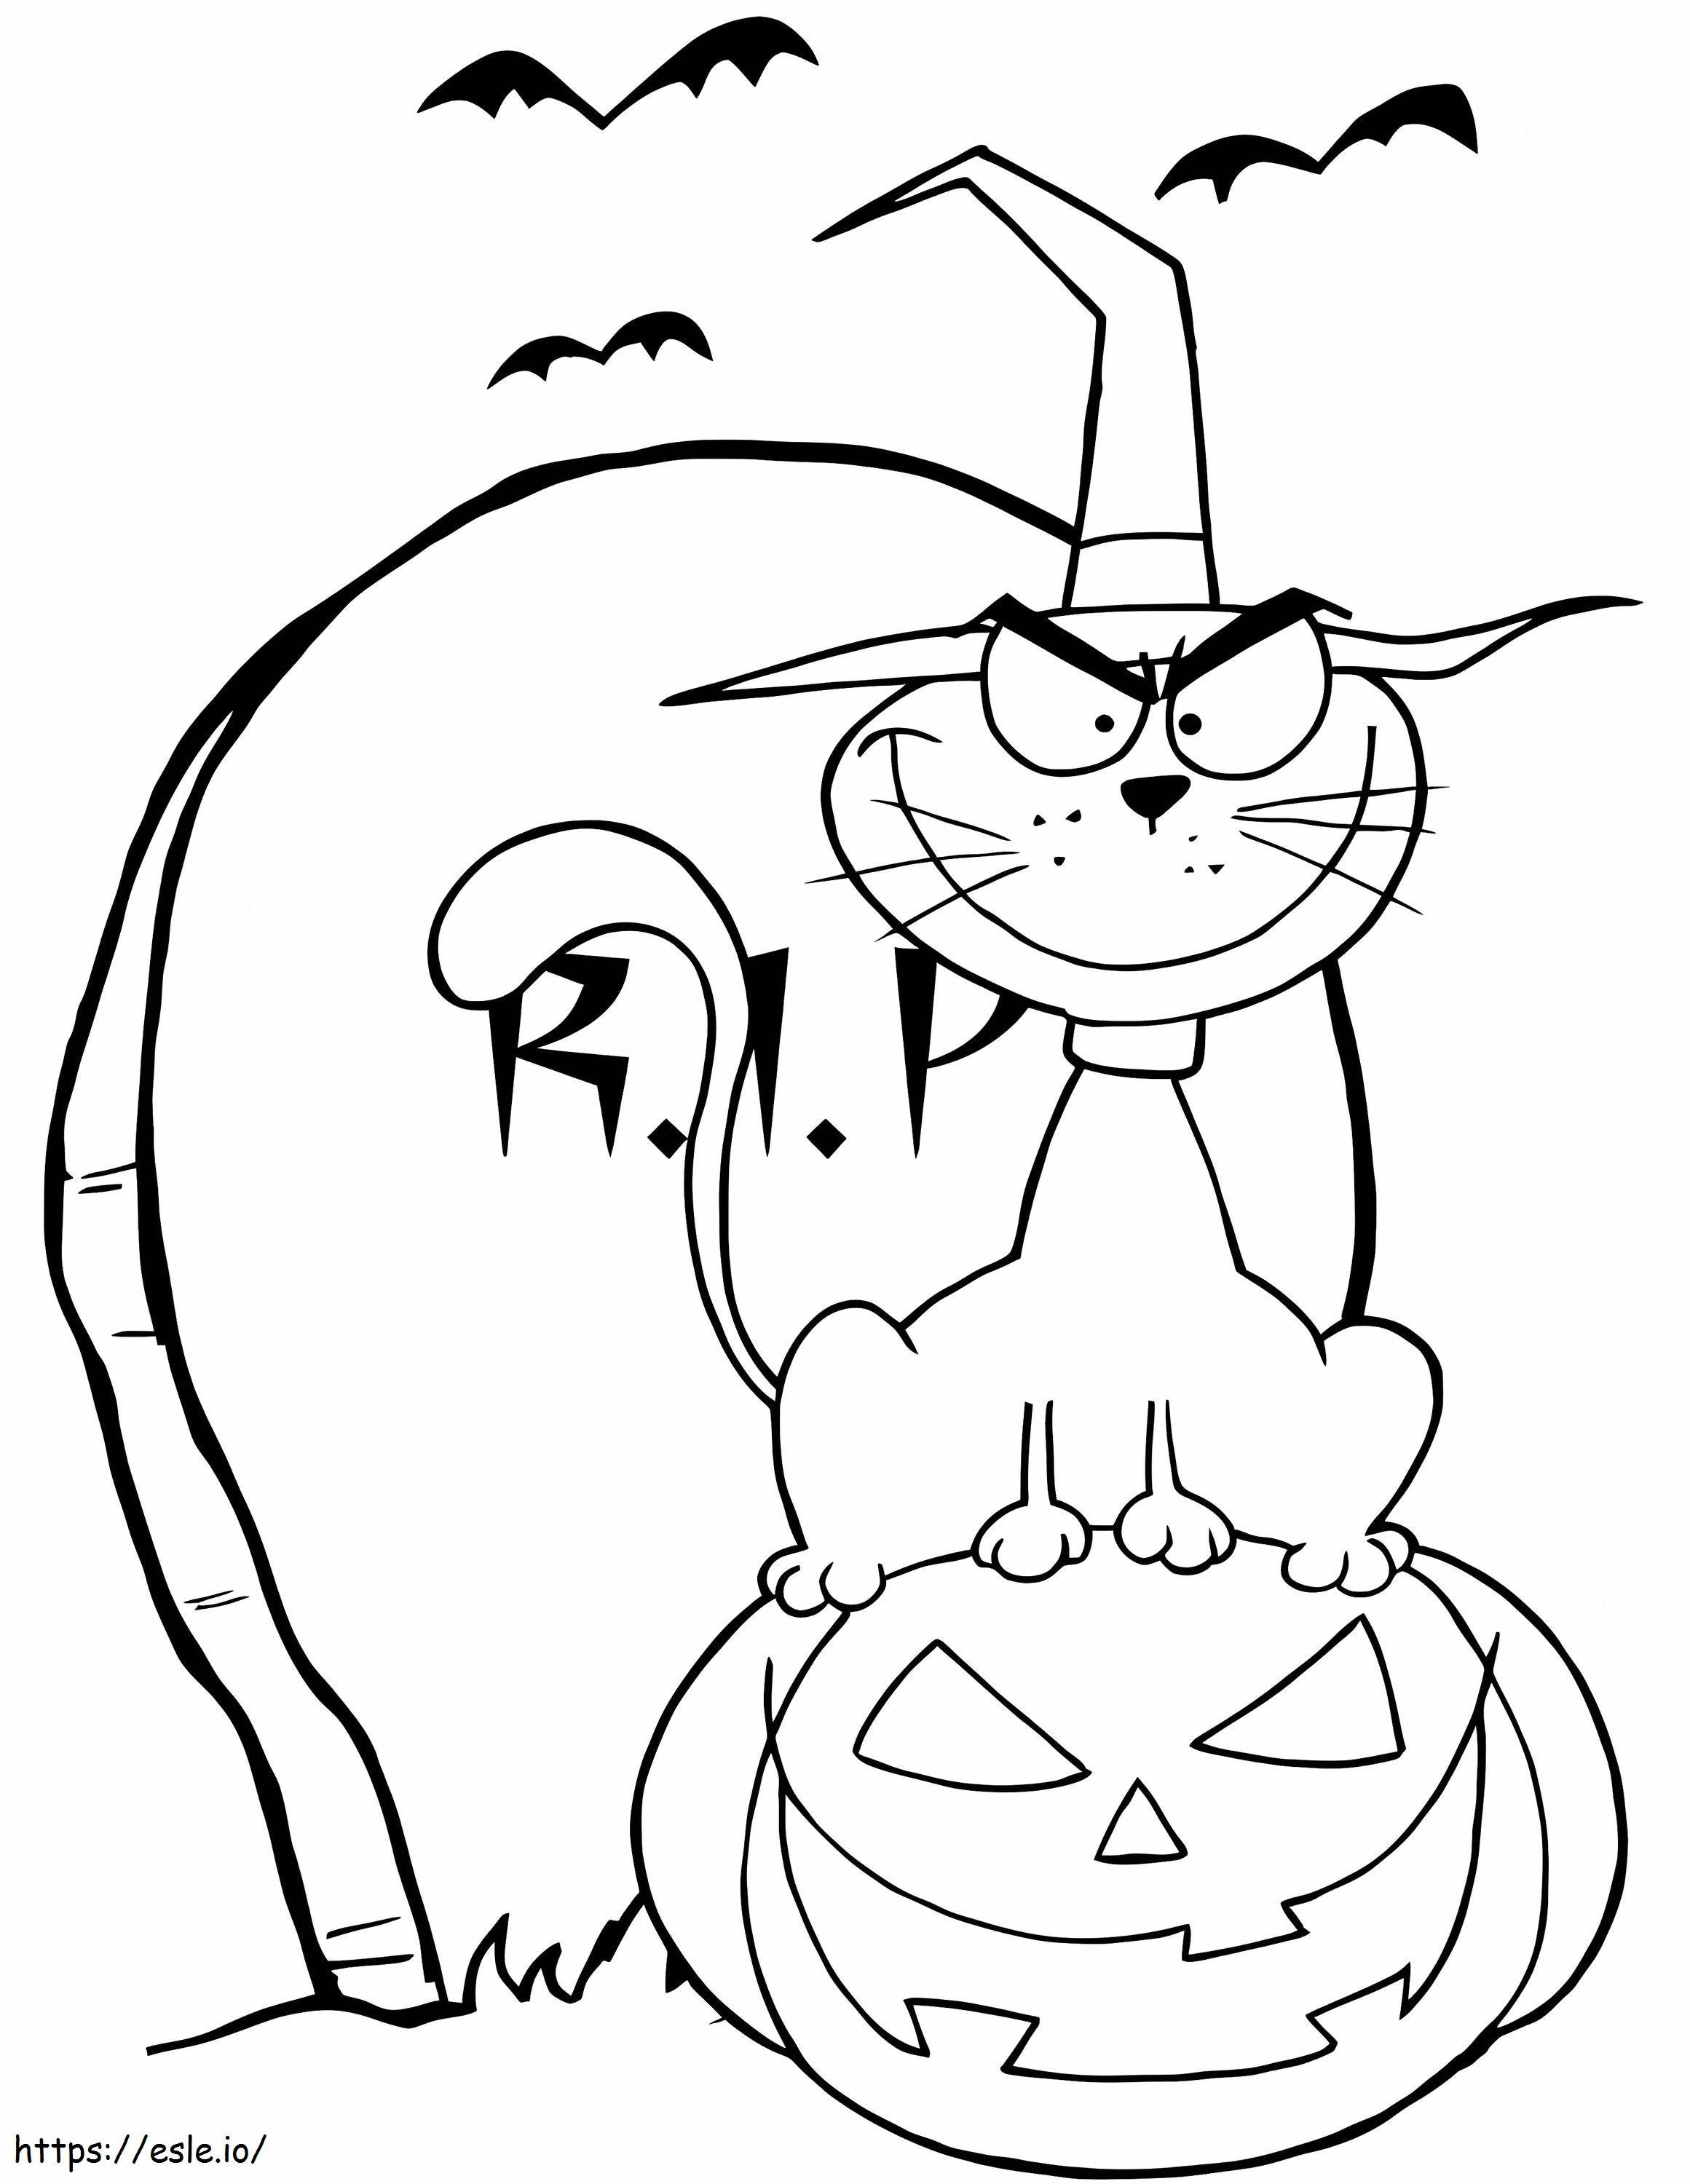 Halloween Cat Is Smiling coloring page